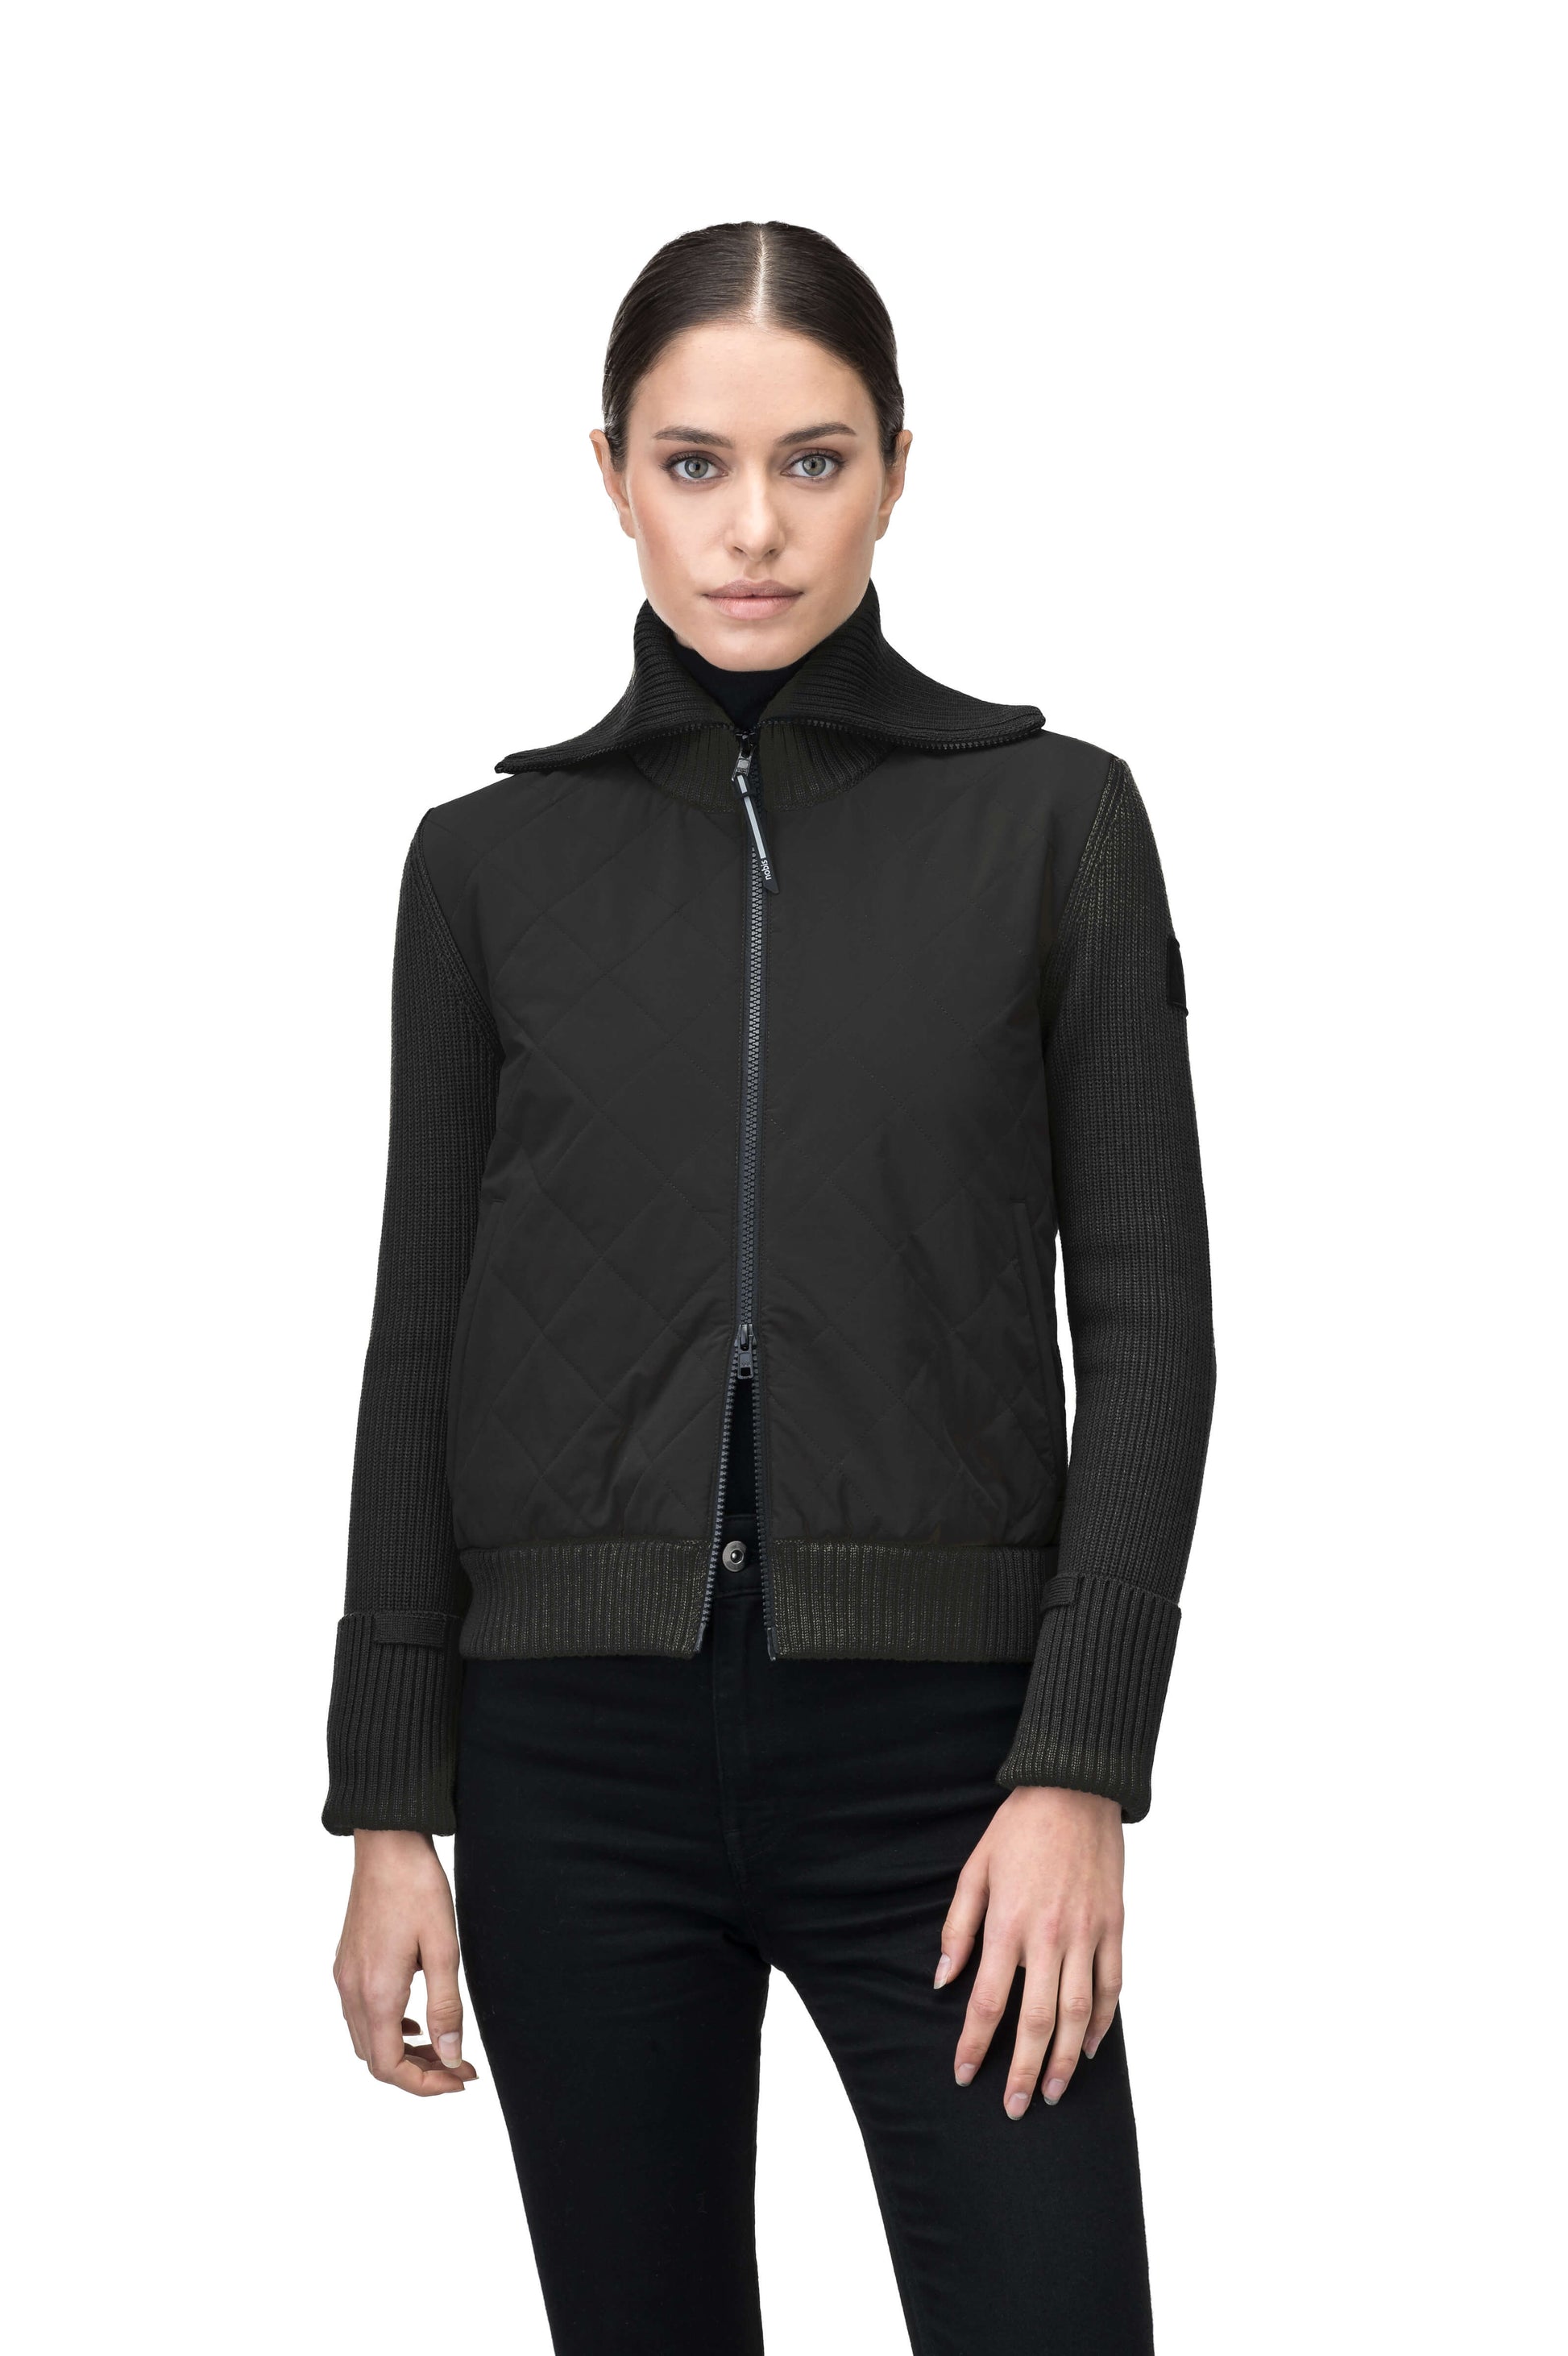 Ada Ladies Quilted Full Zip Sweater in hip length, PrimaLoft Gold Insulation Active+, Durable 4-Way Stretch Weave quilted torso, Merino wool knit collar, sleeves, back, and cuffs, two-way front zipper, and hidden waist pockets, in Black